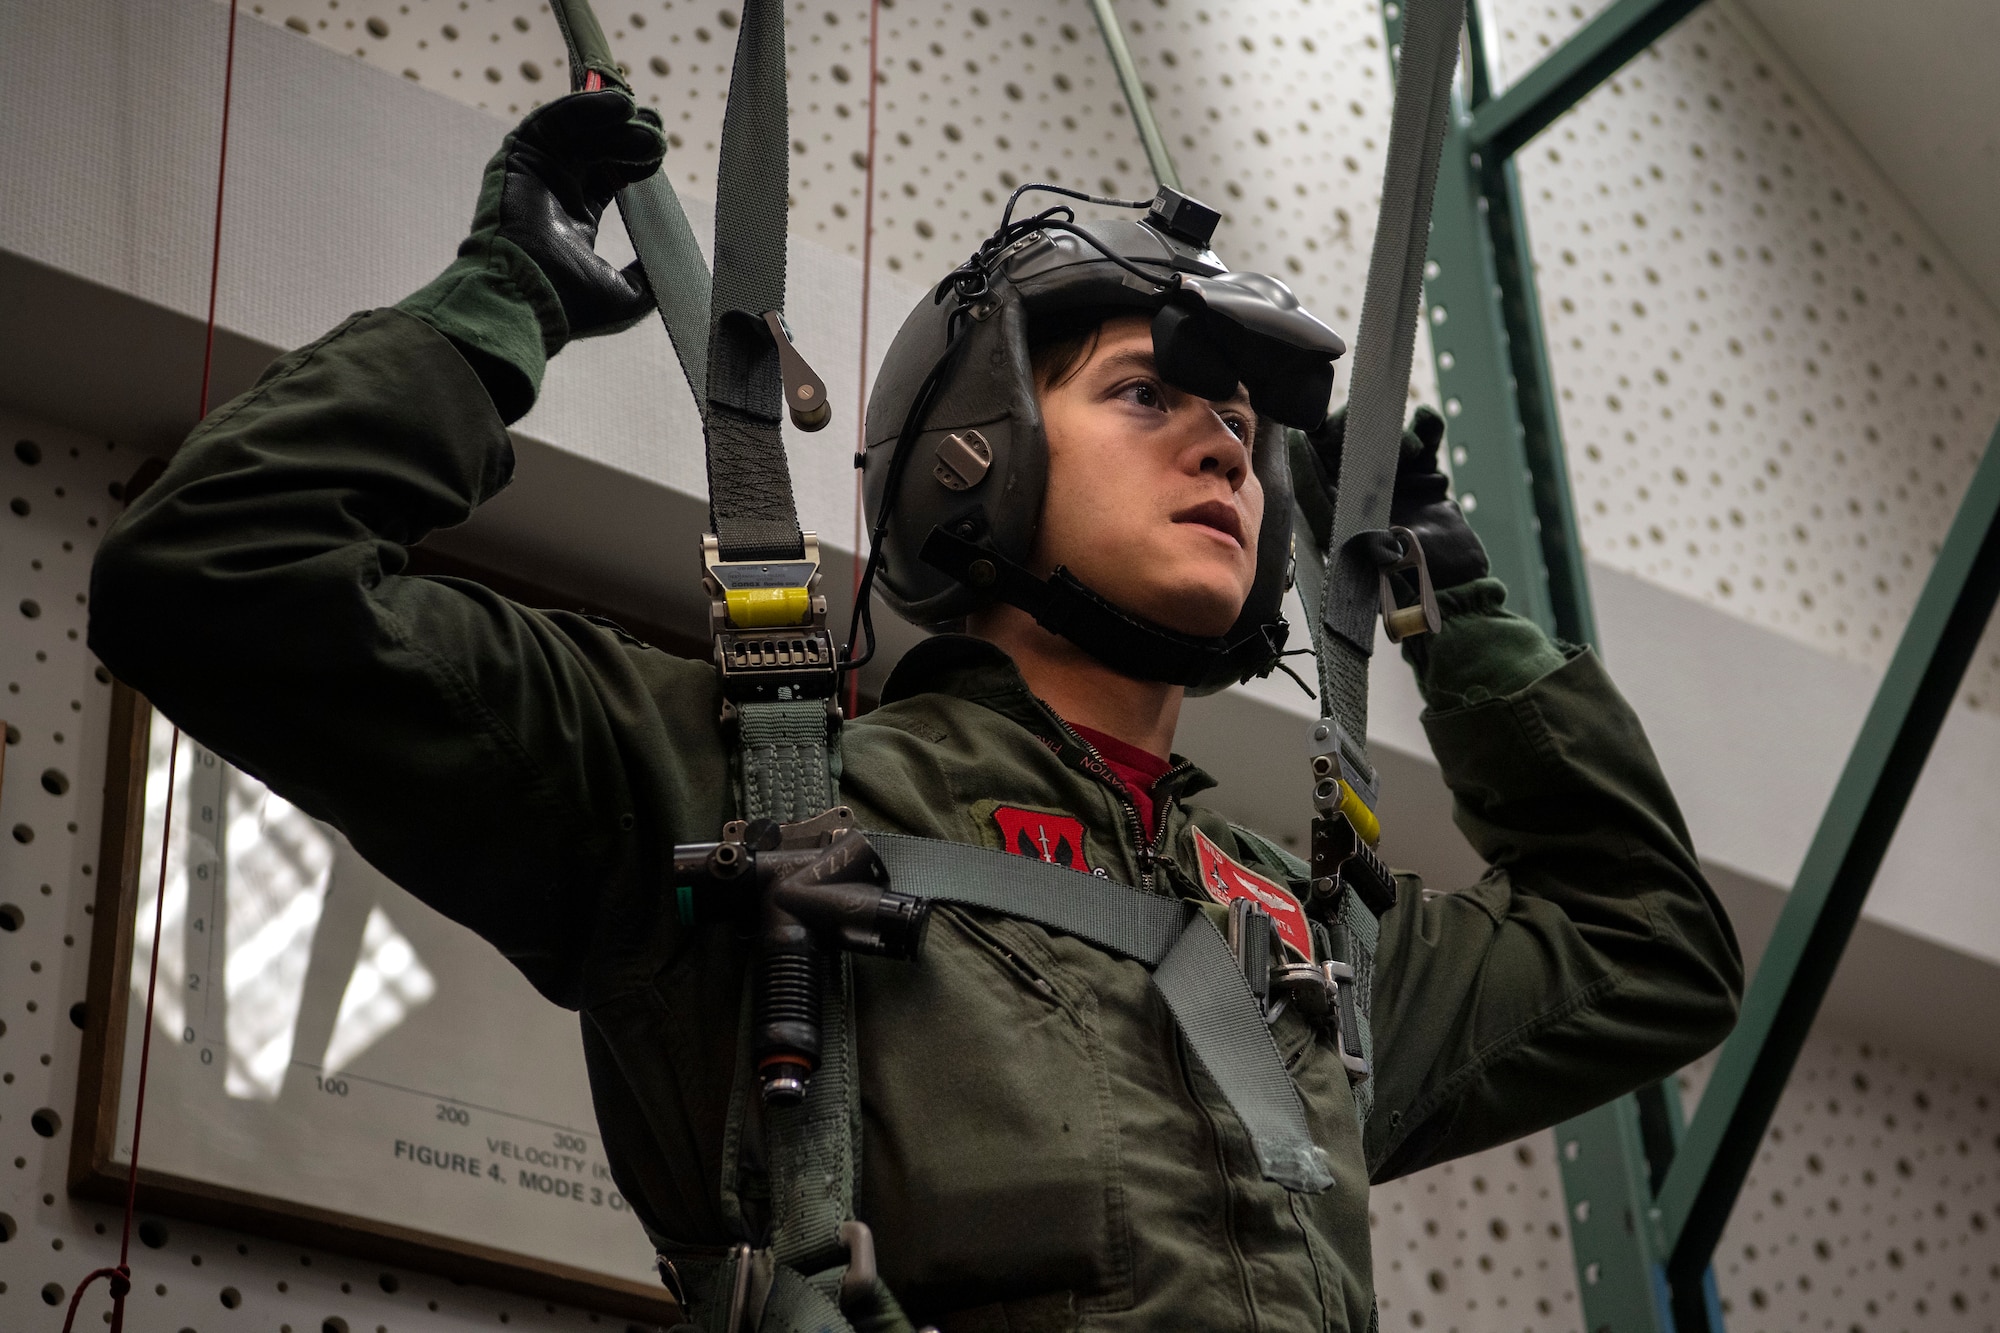 U.S. Air Force Capt. Daniel Hayduchok, 480th Fighter Squadron pilot, uses a virtual-reality parachute system during Survival, Evasion, Resistance, and Escape training at Spangdahlem Air Base, Germany, March 6, 2020. SERE training teaches pilots how to safely hit the ground in a parachute and troubleshoot problems in an emergency scenario. (U.S. Air Force photo by Senior Airman Valerie R. Seelye)